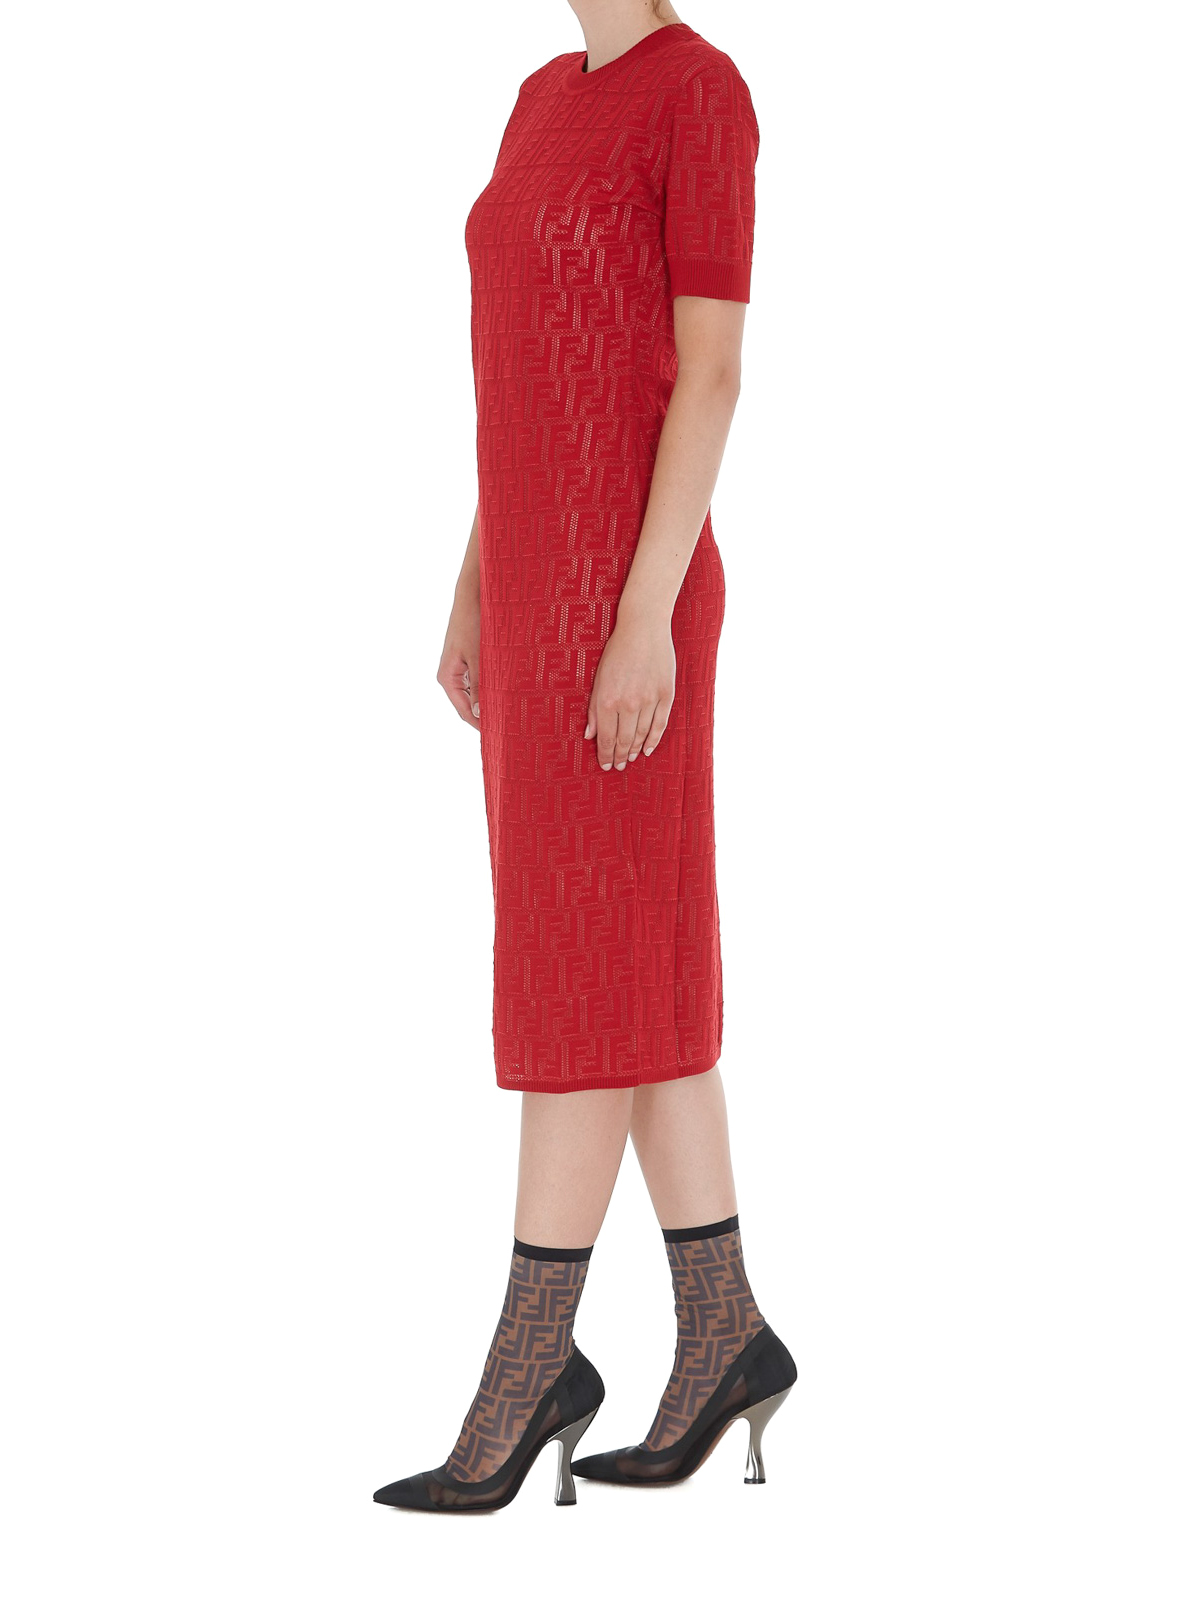 red cotton dress with sleeves